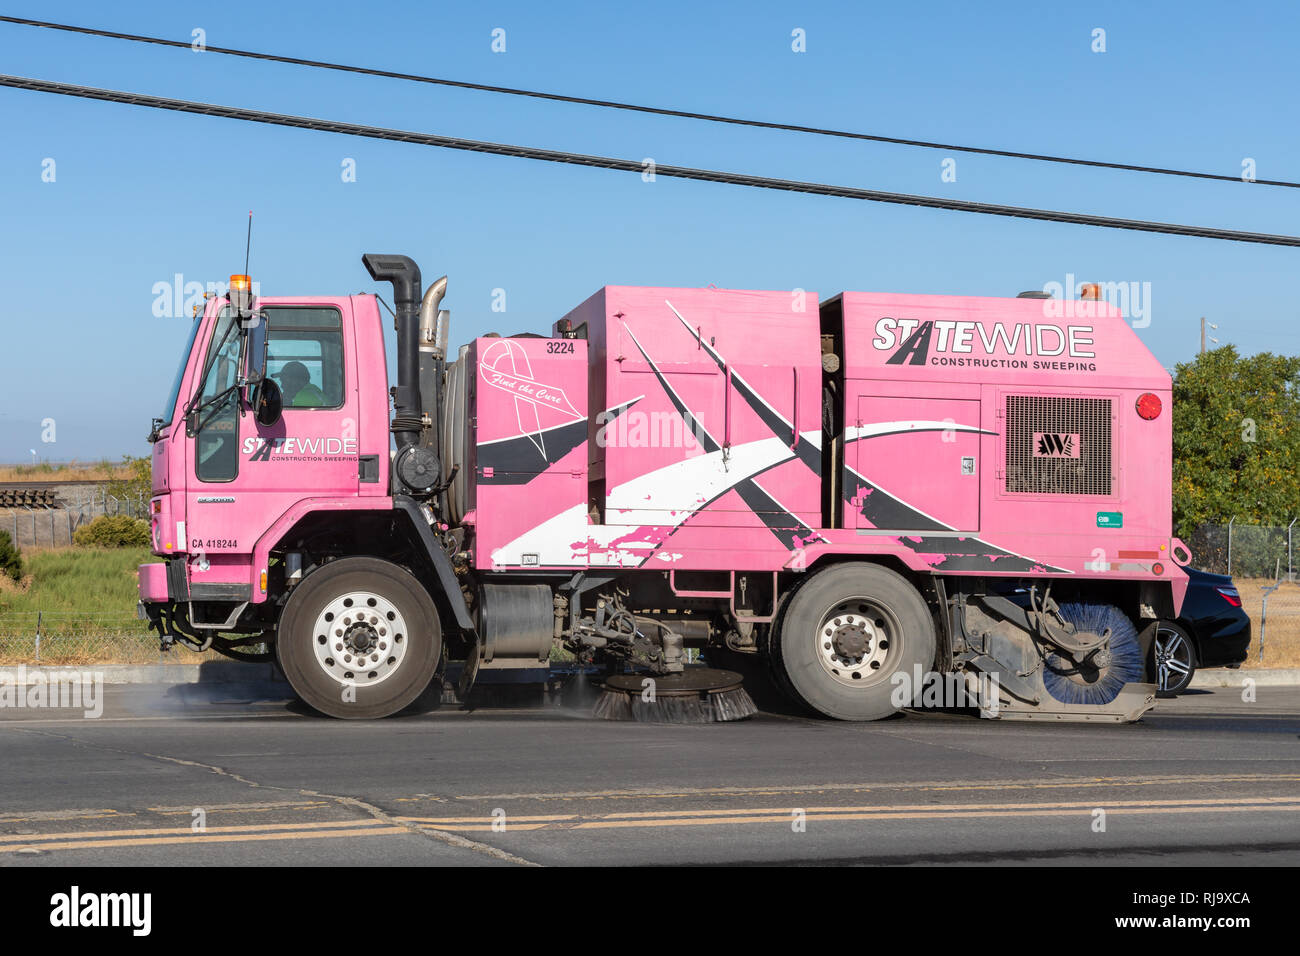 Pink street sweeper (Statewide Construction Sweeping) sweeping a road; Alviso, California, USA Stock Photo